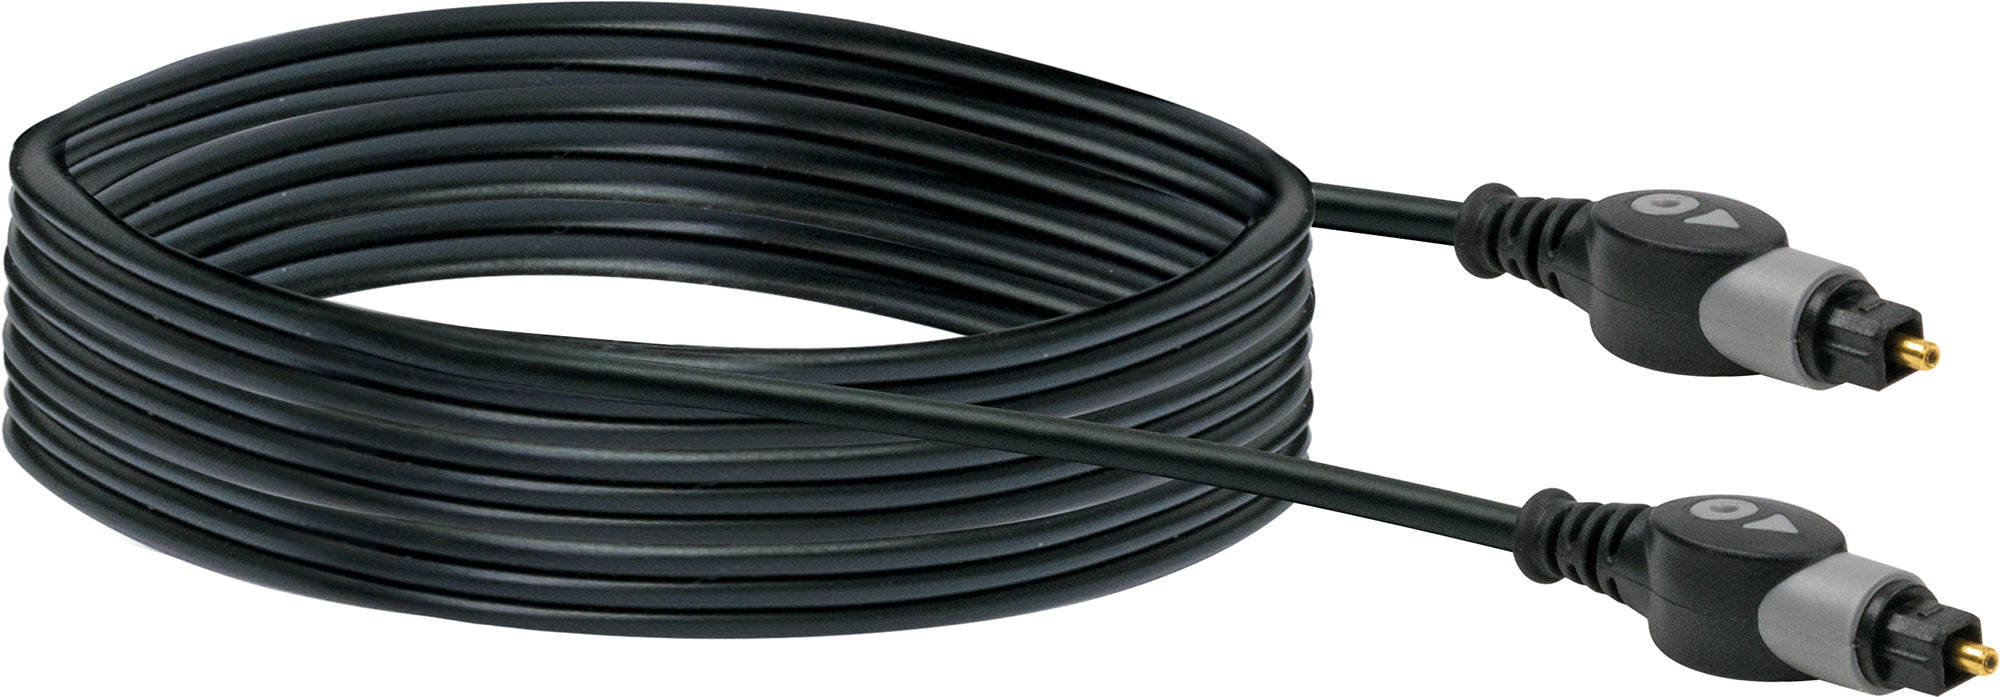 Fiber optic connection cable